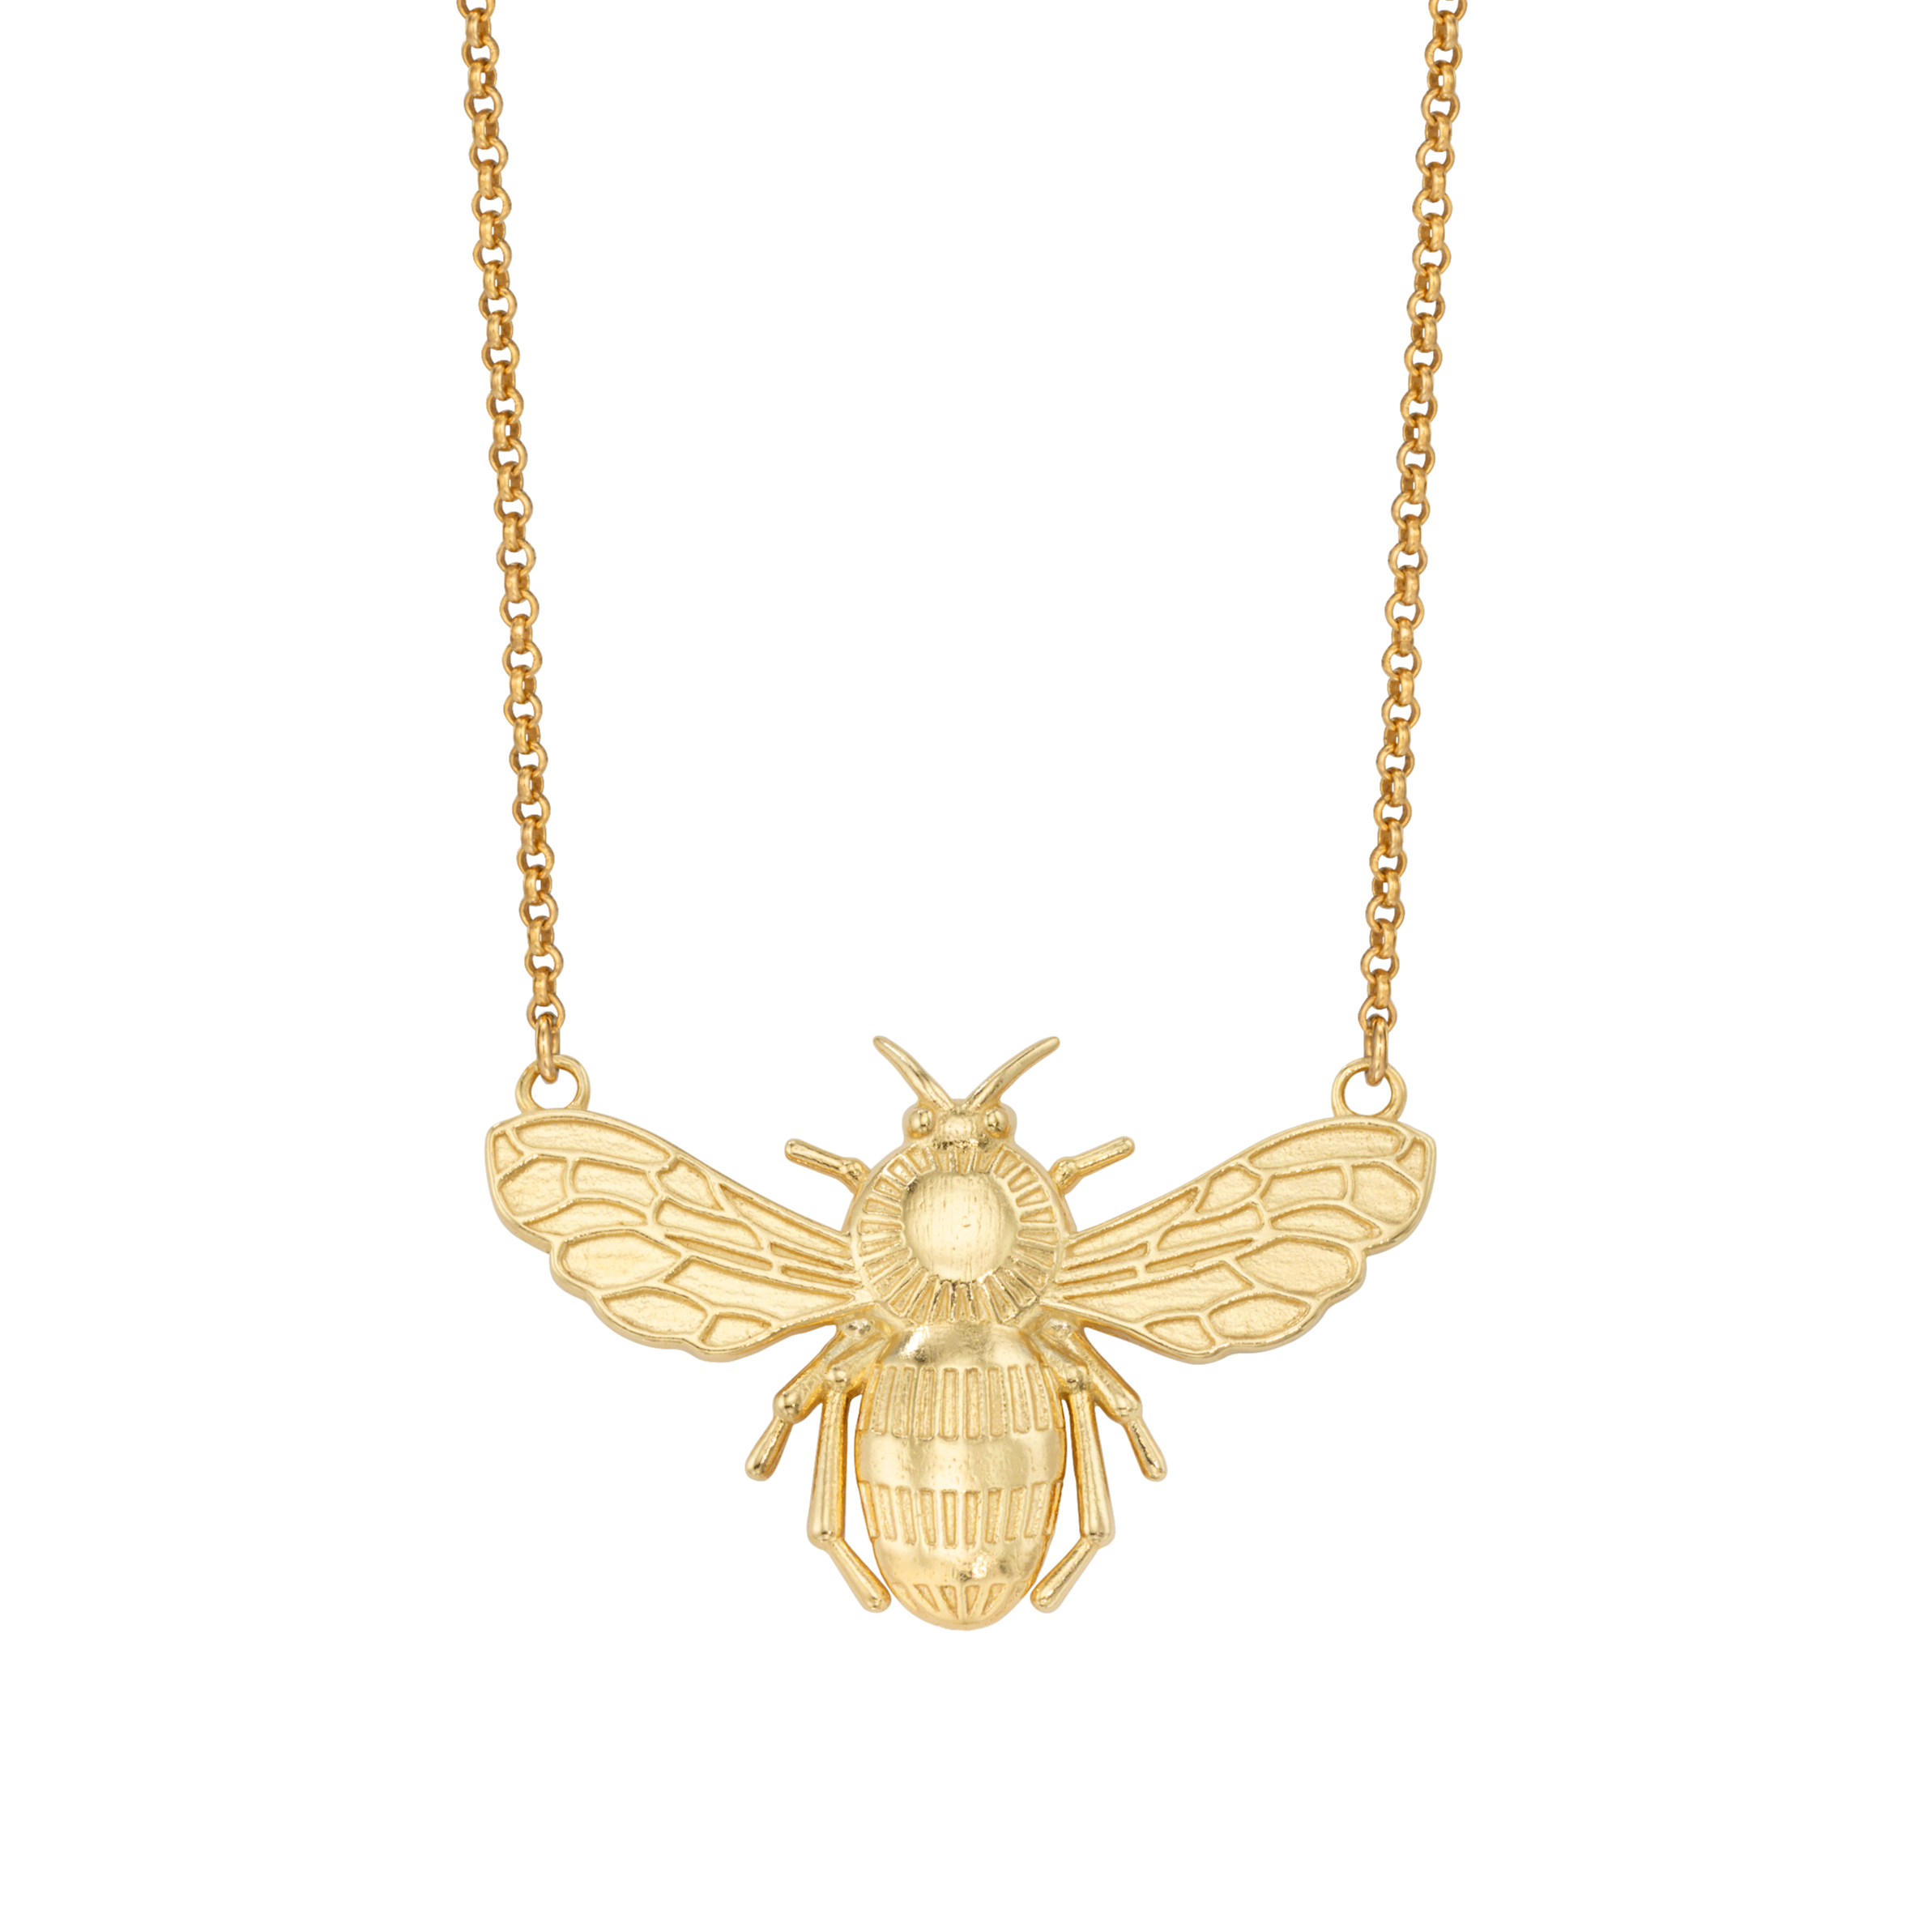 Real Golden Bumblebee Necklace - Real Golden Bumblebee Necklace